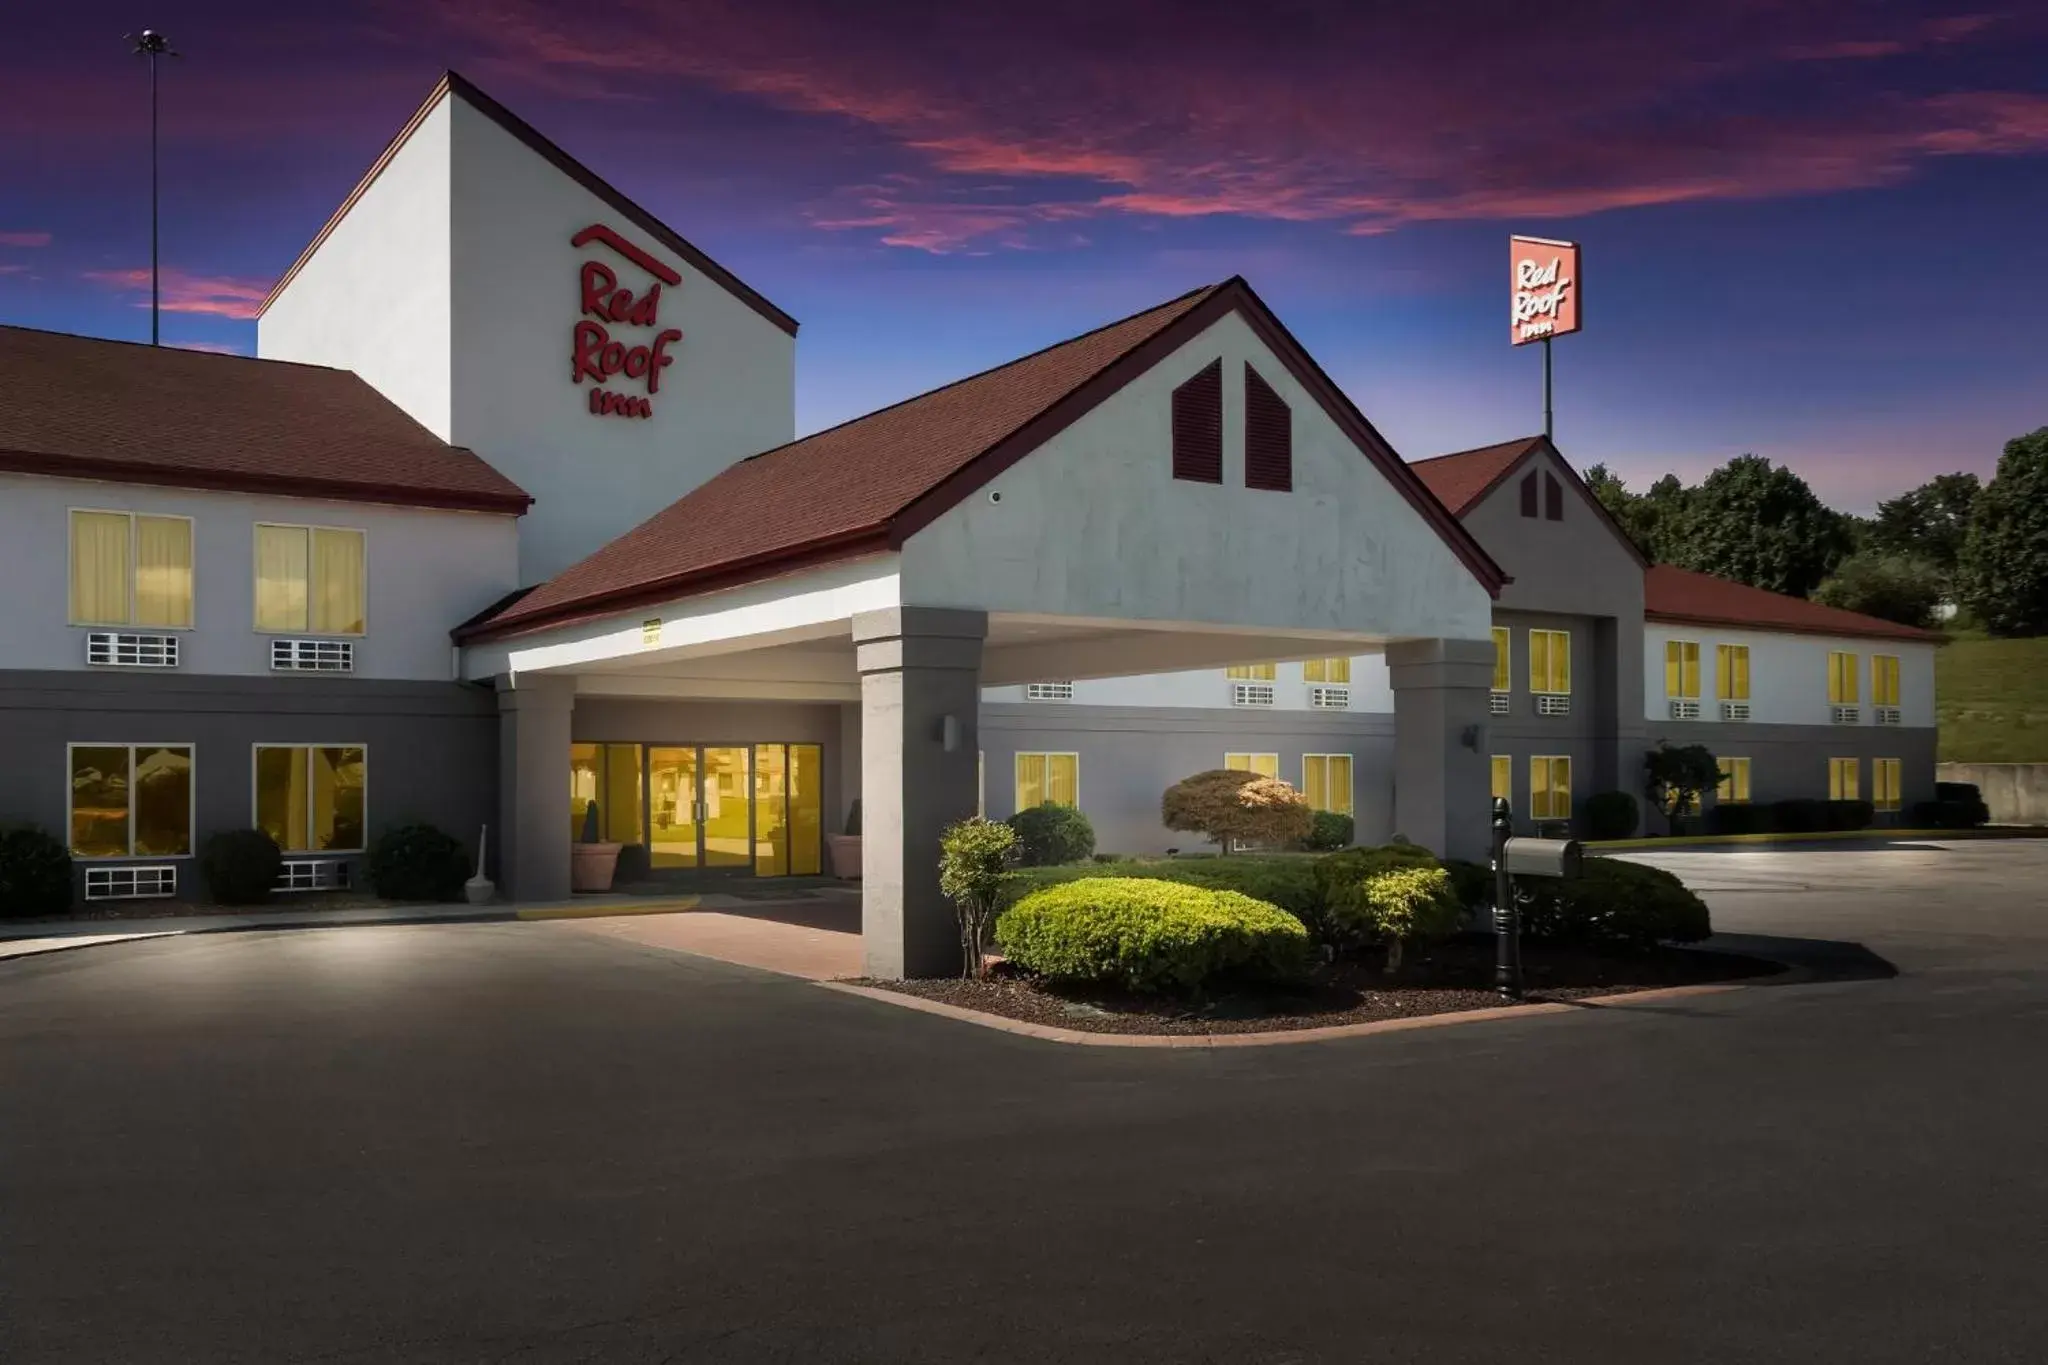 Property Building in Red Roof Inn London I-75